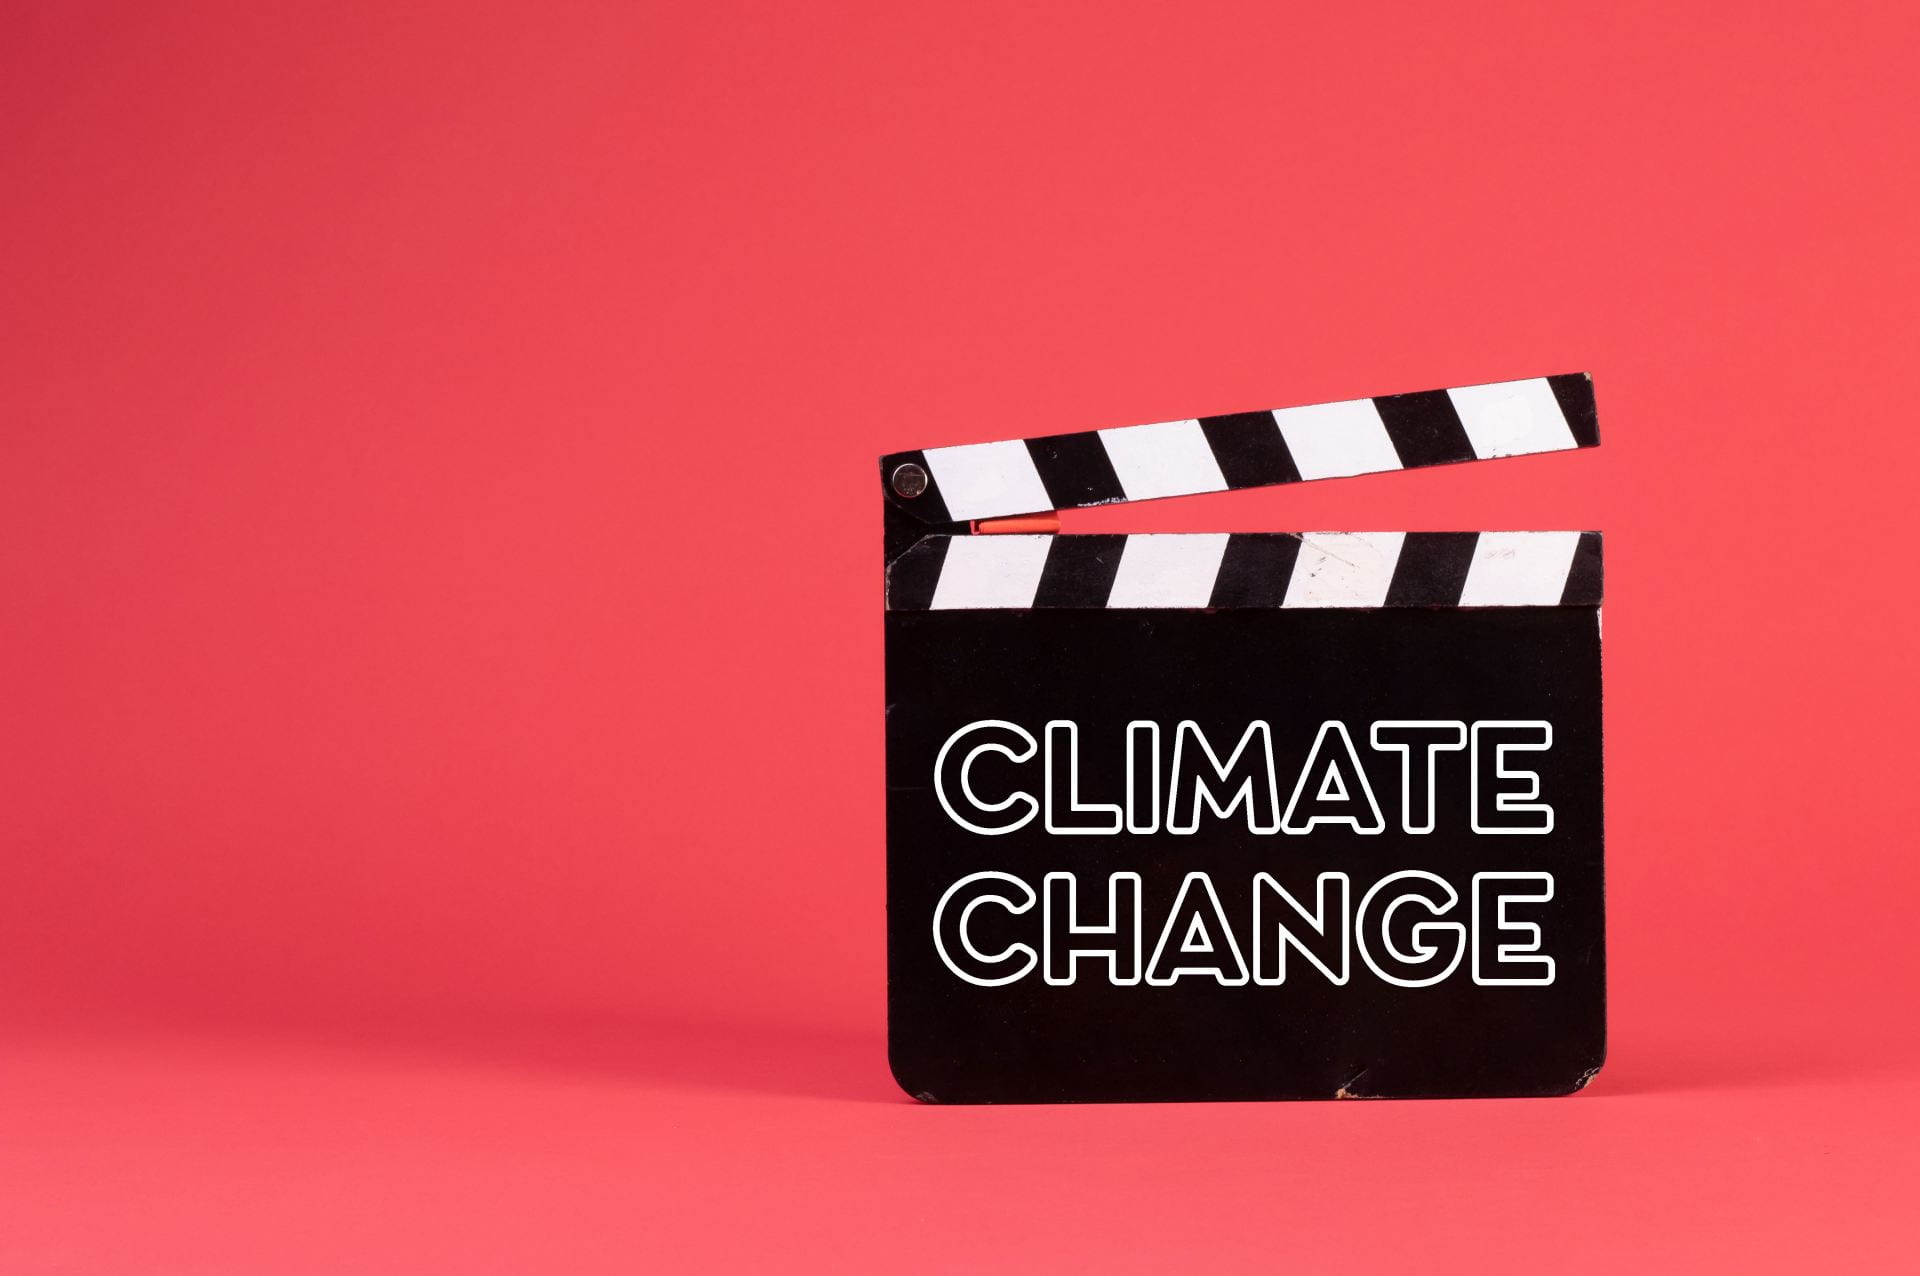 Image of a clapper board with climate change written on it in capitals letters.